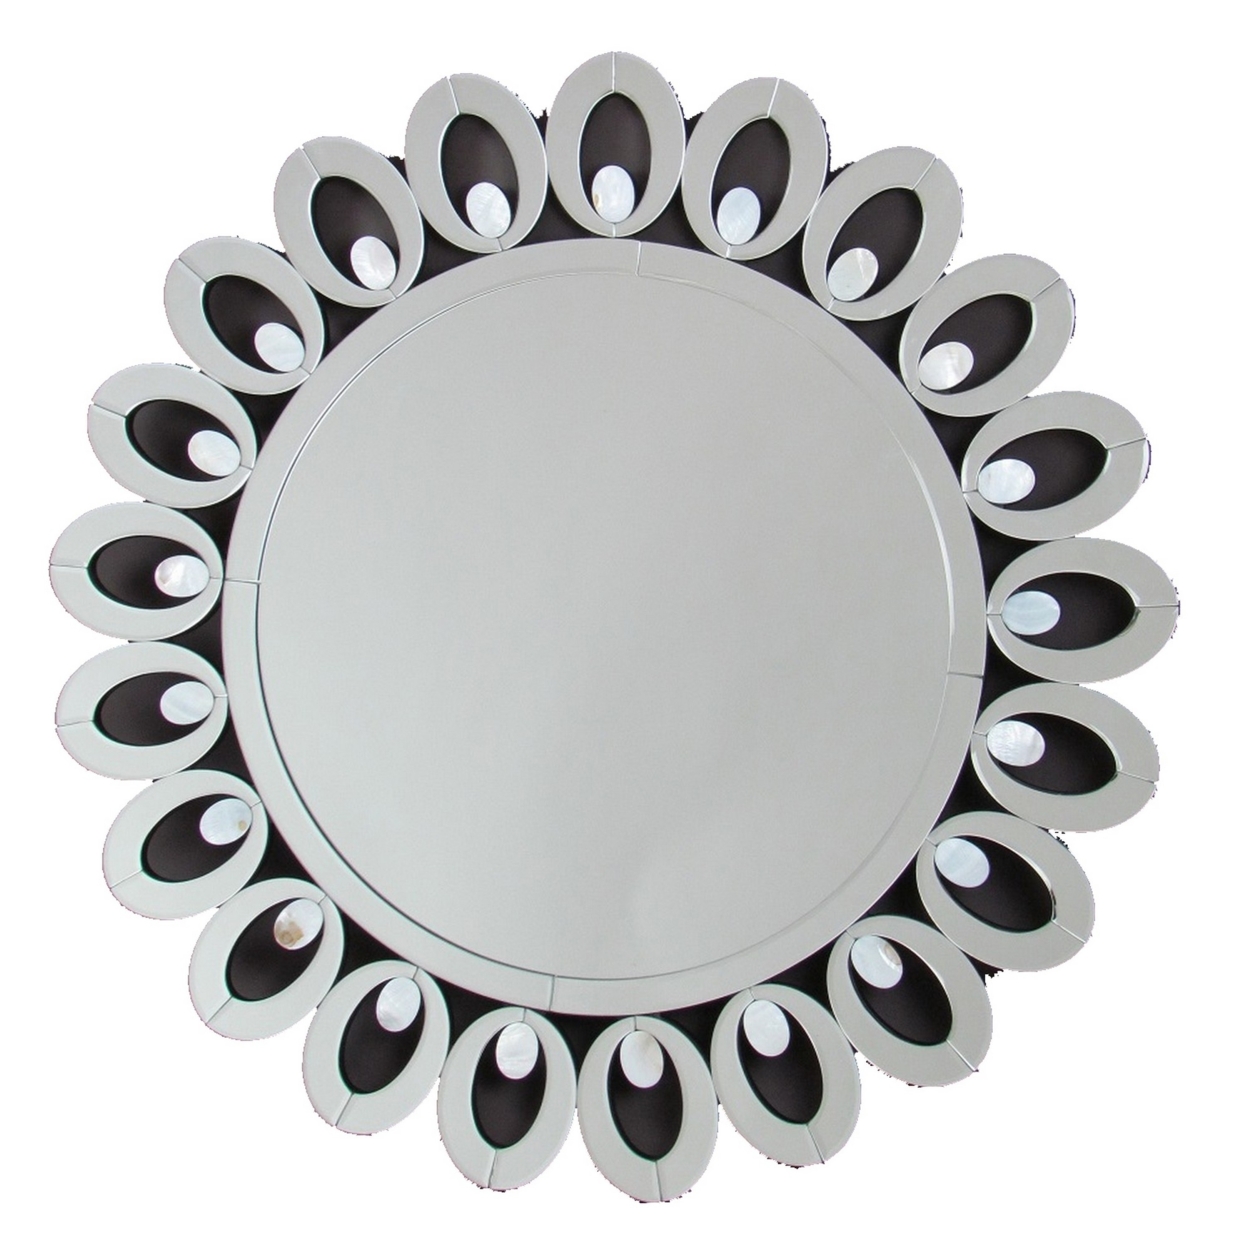 Mirror With Open Cut Design And Mother Of Pearl Accent, Silver- Saltoro Sherpi